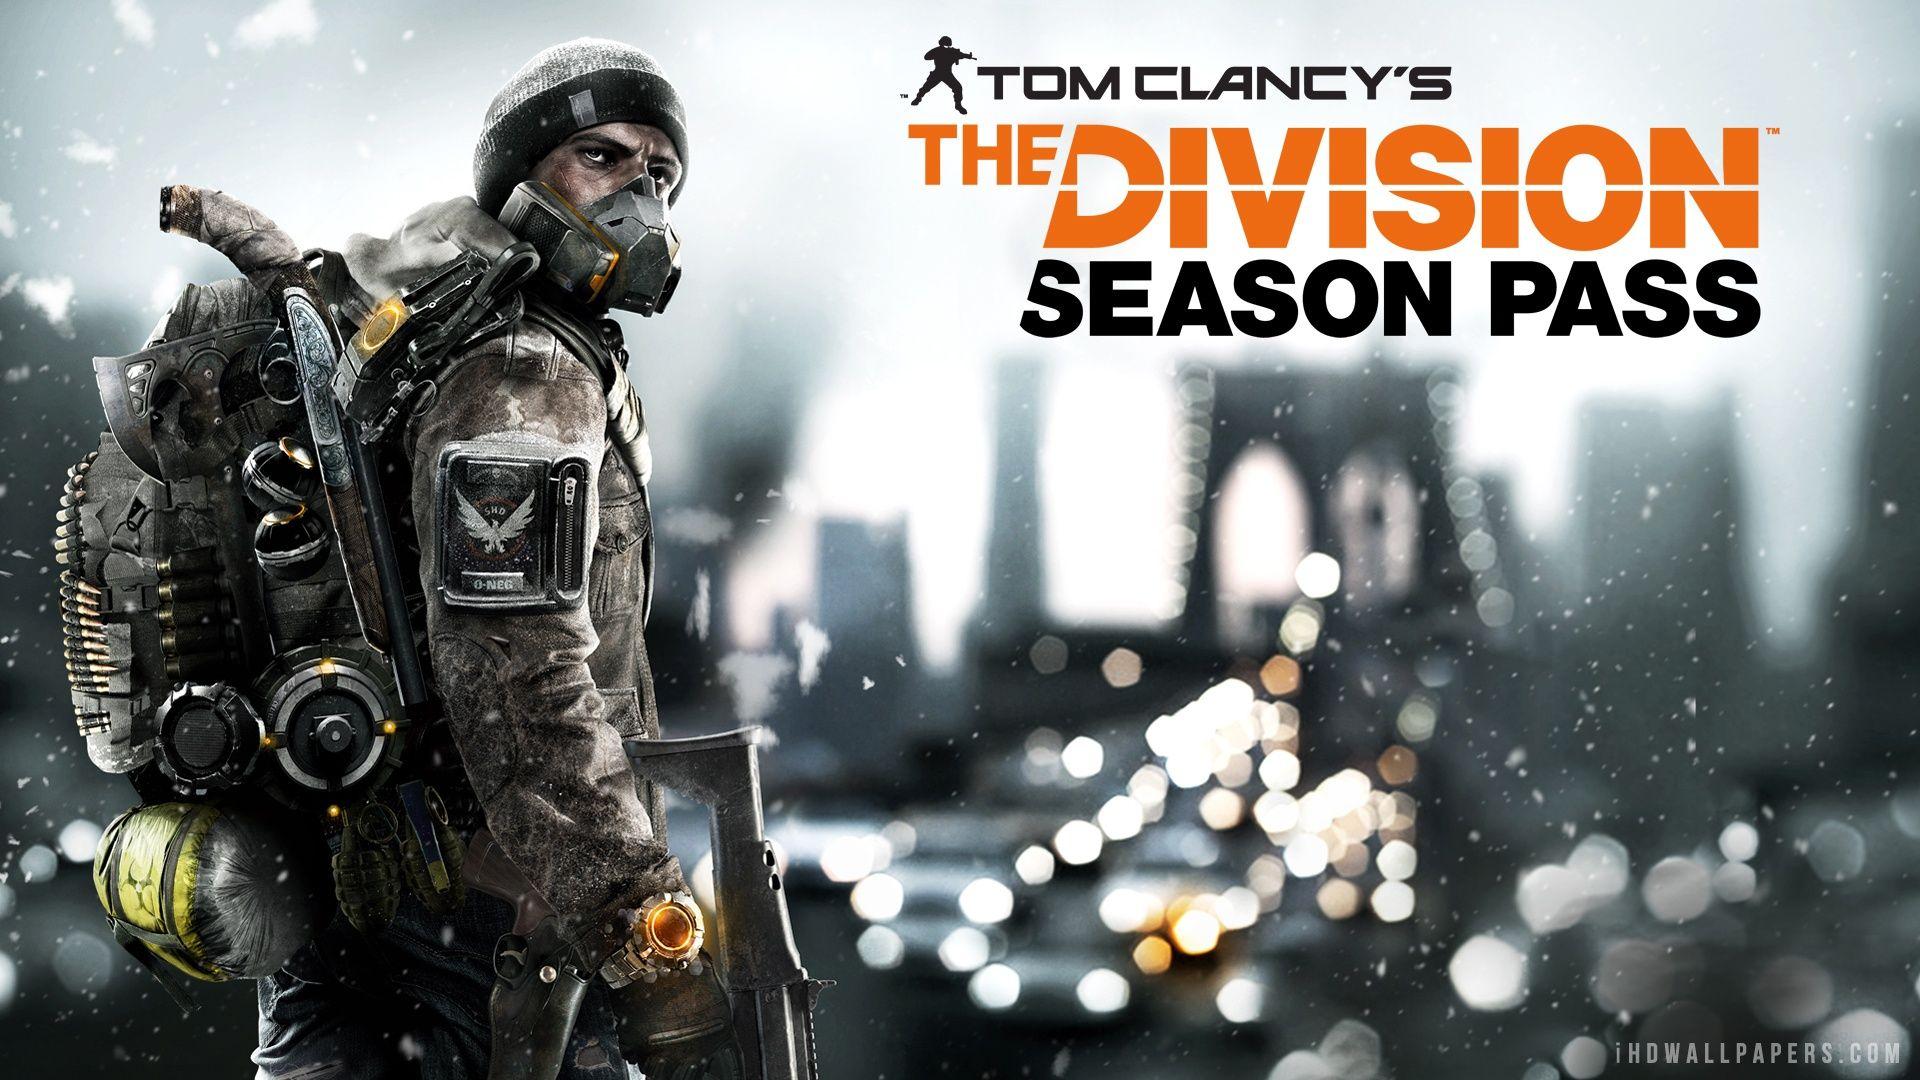 Tom Clancy&;s The Division Season Pass wallpaper, clancy&;s HD